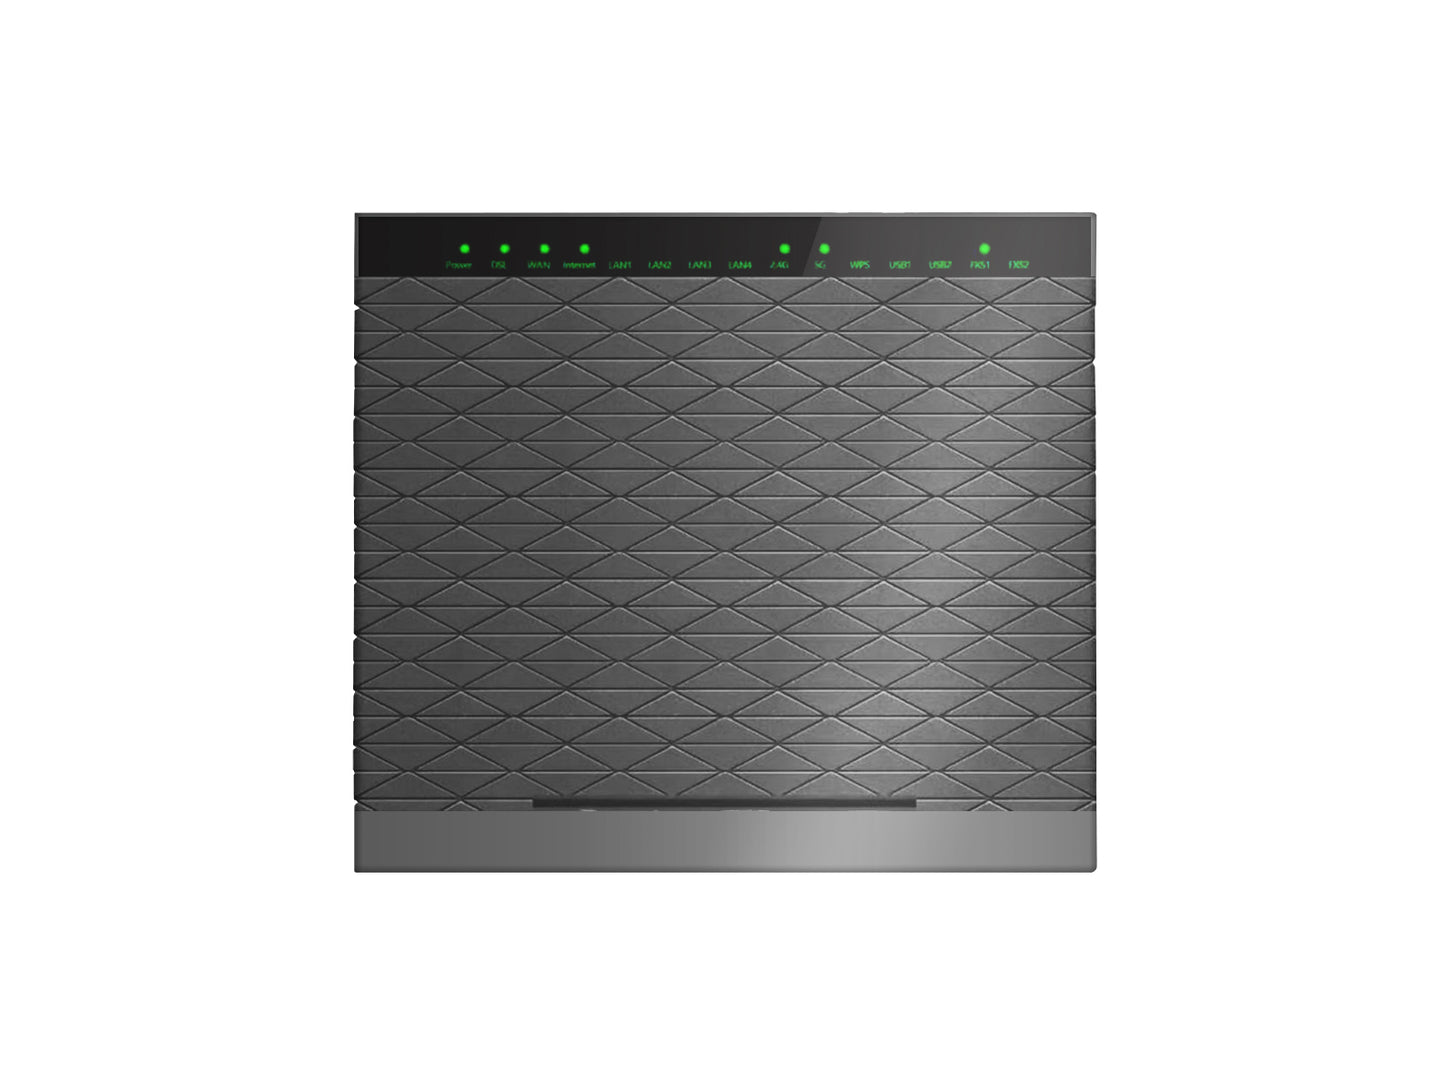 BDI Hybrid VDSL/4G/LTE Multiple WAN Modem Router with VoIP